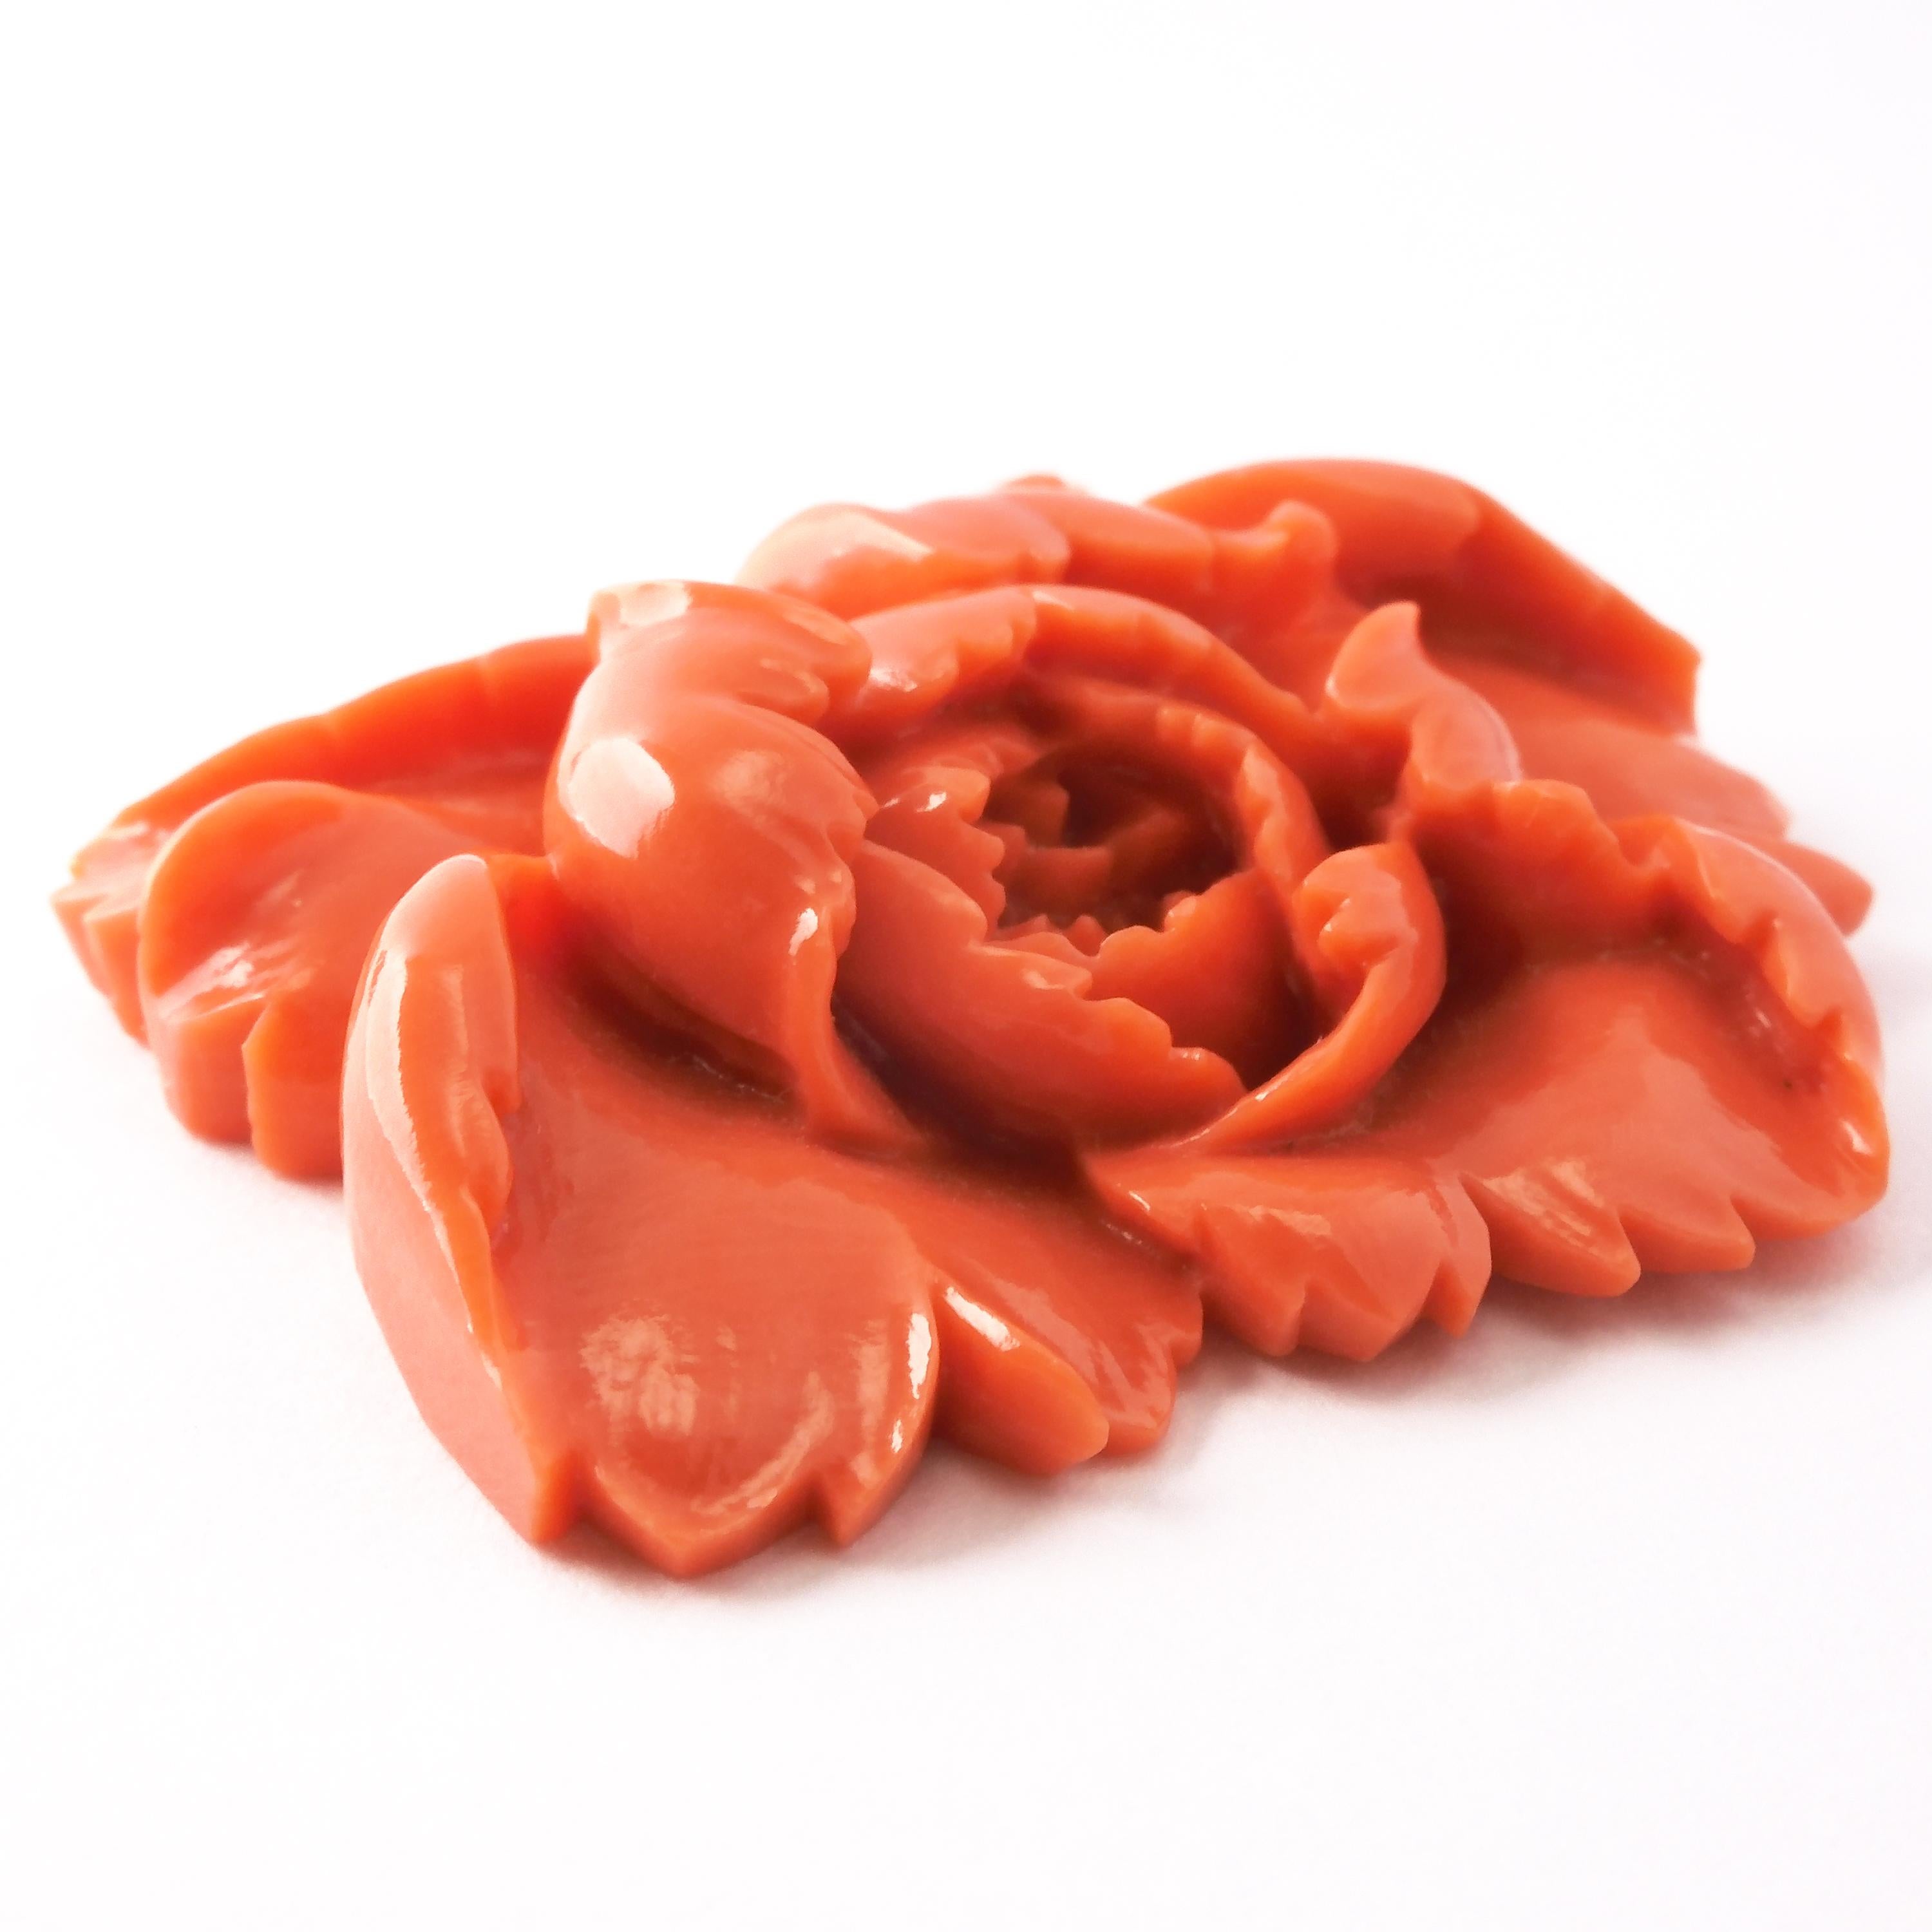 Mixed Cut Vintage Japanese Momoiro Sango Carved Coral Plate, Peony Flower For Sale